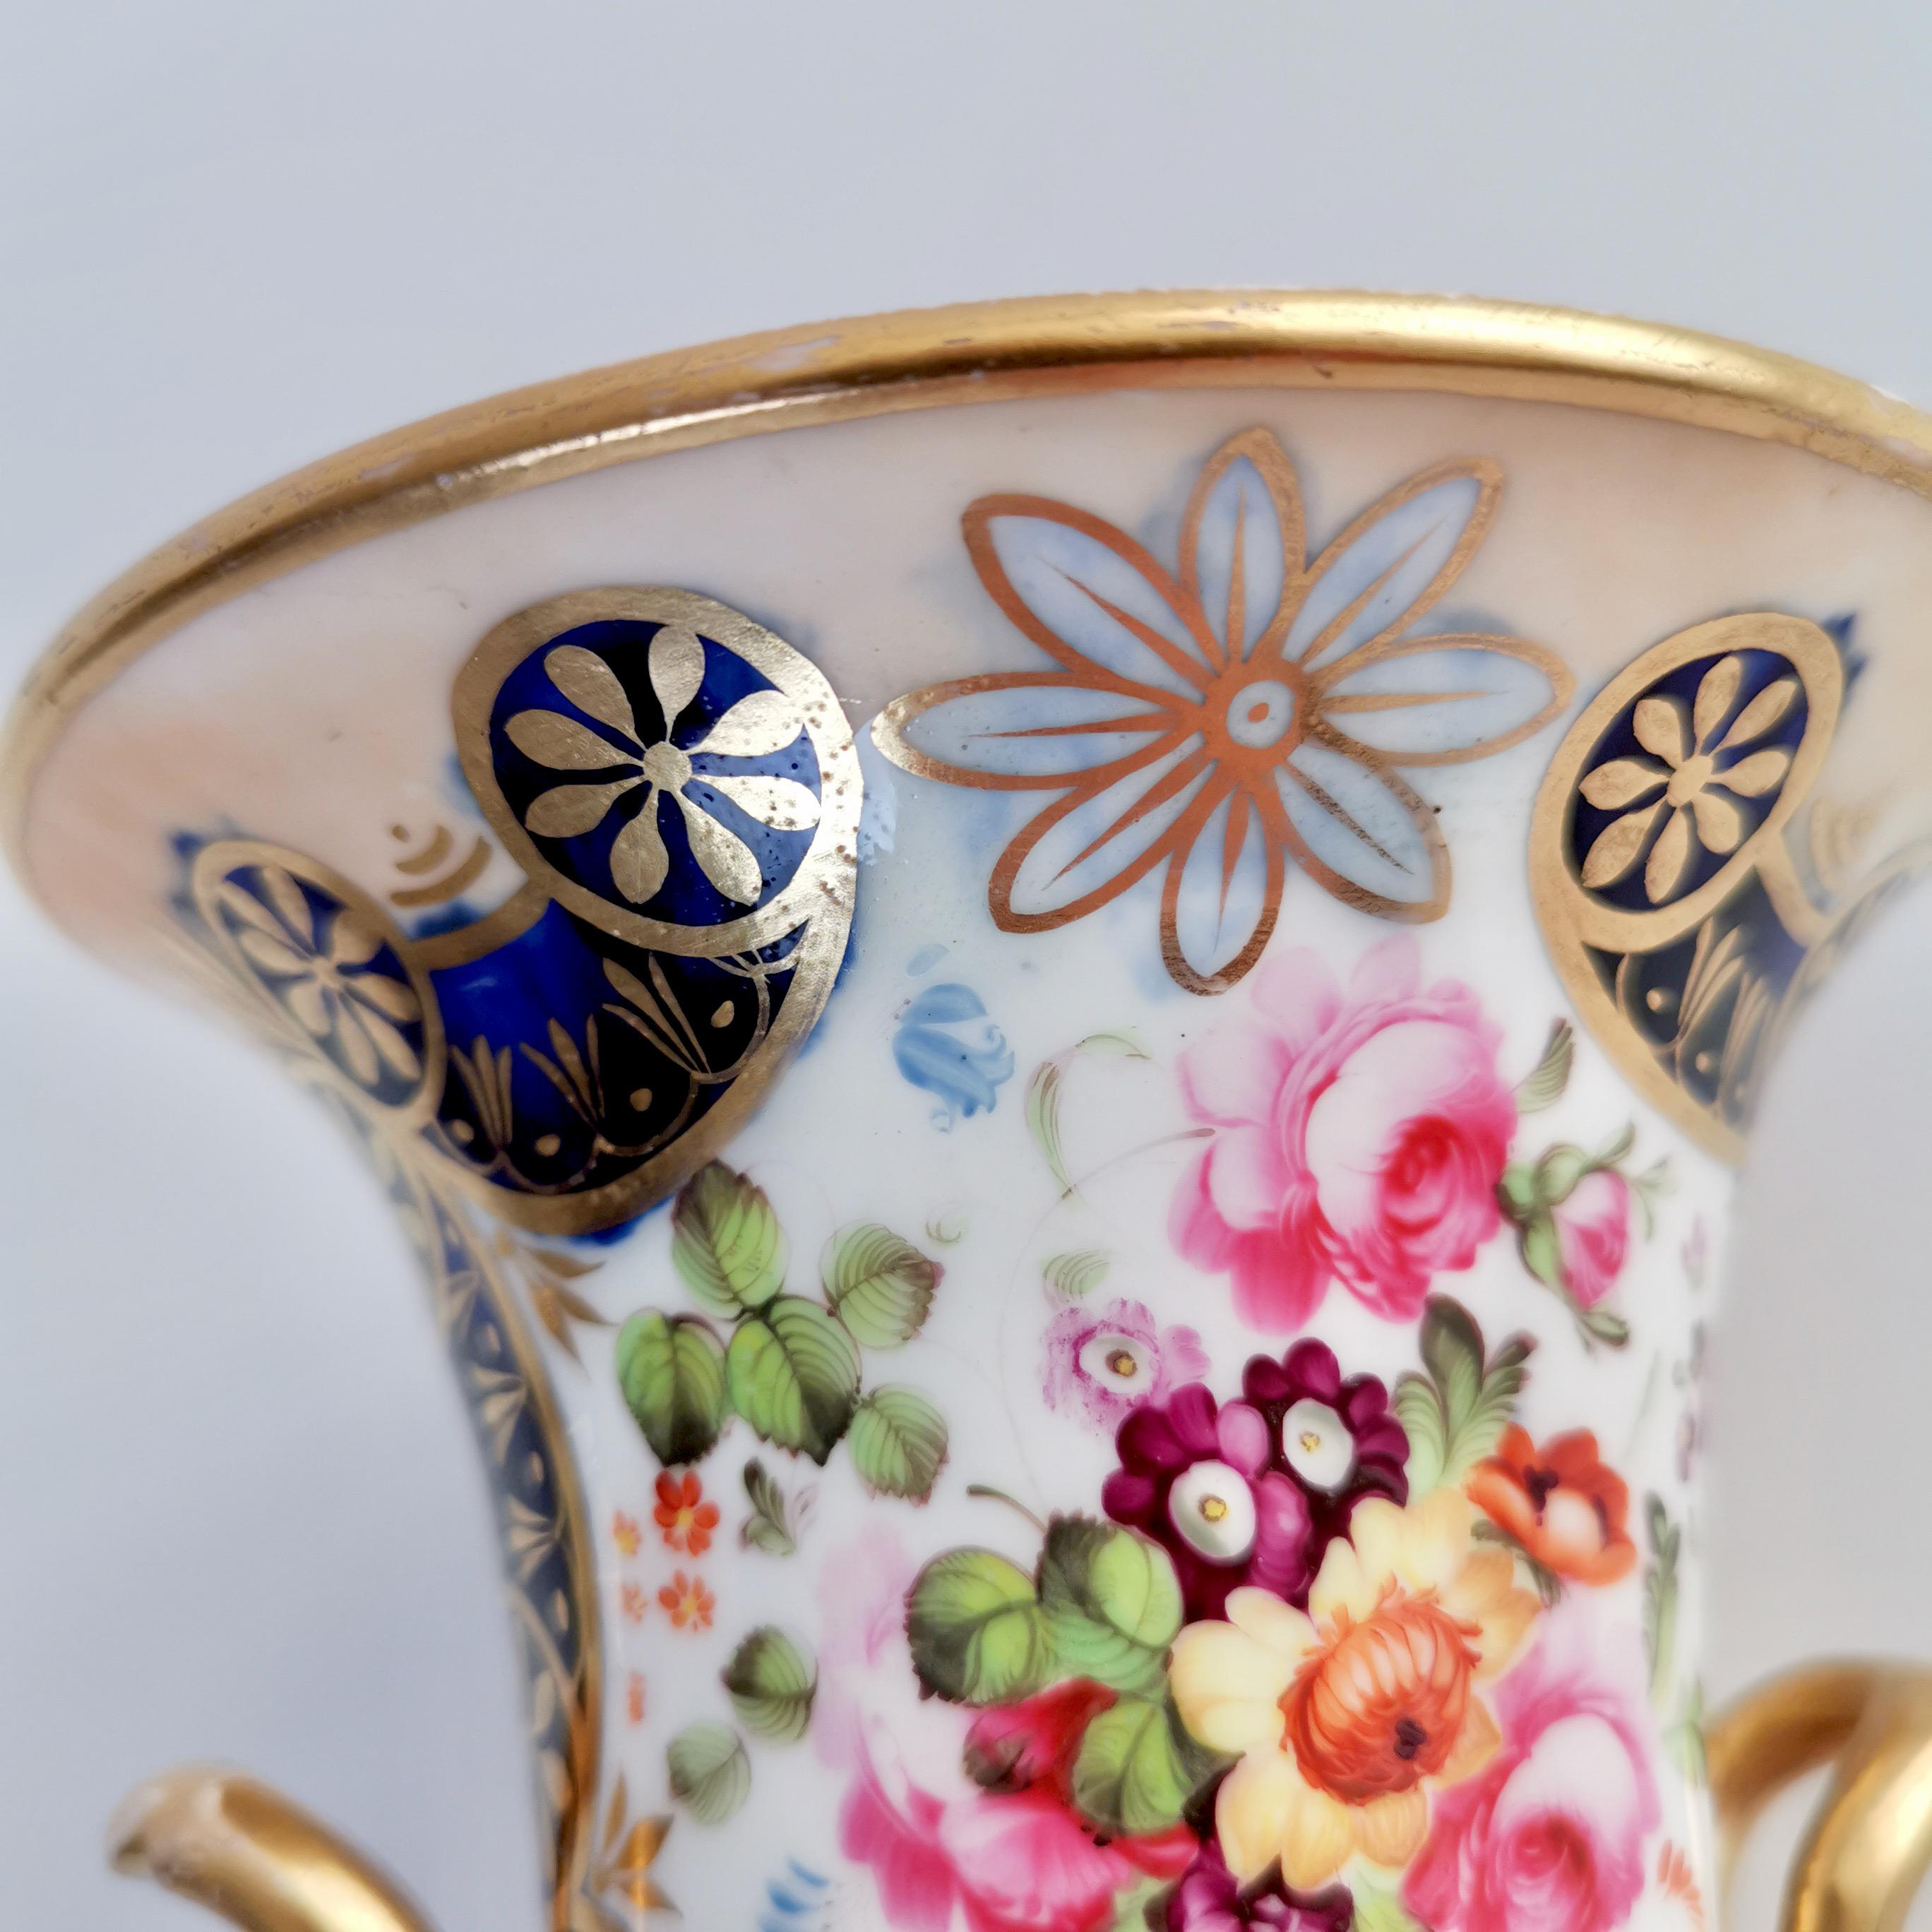 Early 19th Century Staffordshire Porcelain Campana Vase, Salmon, Gilt and Flowers, circa 1820 For Sale